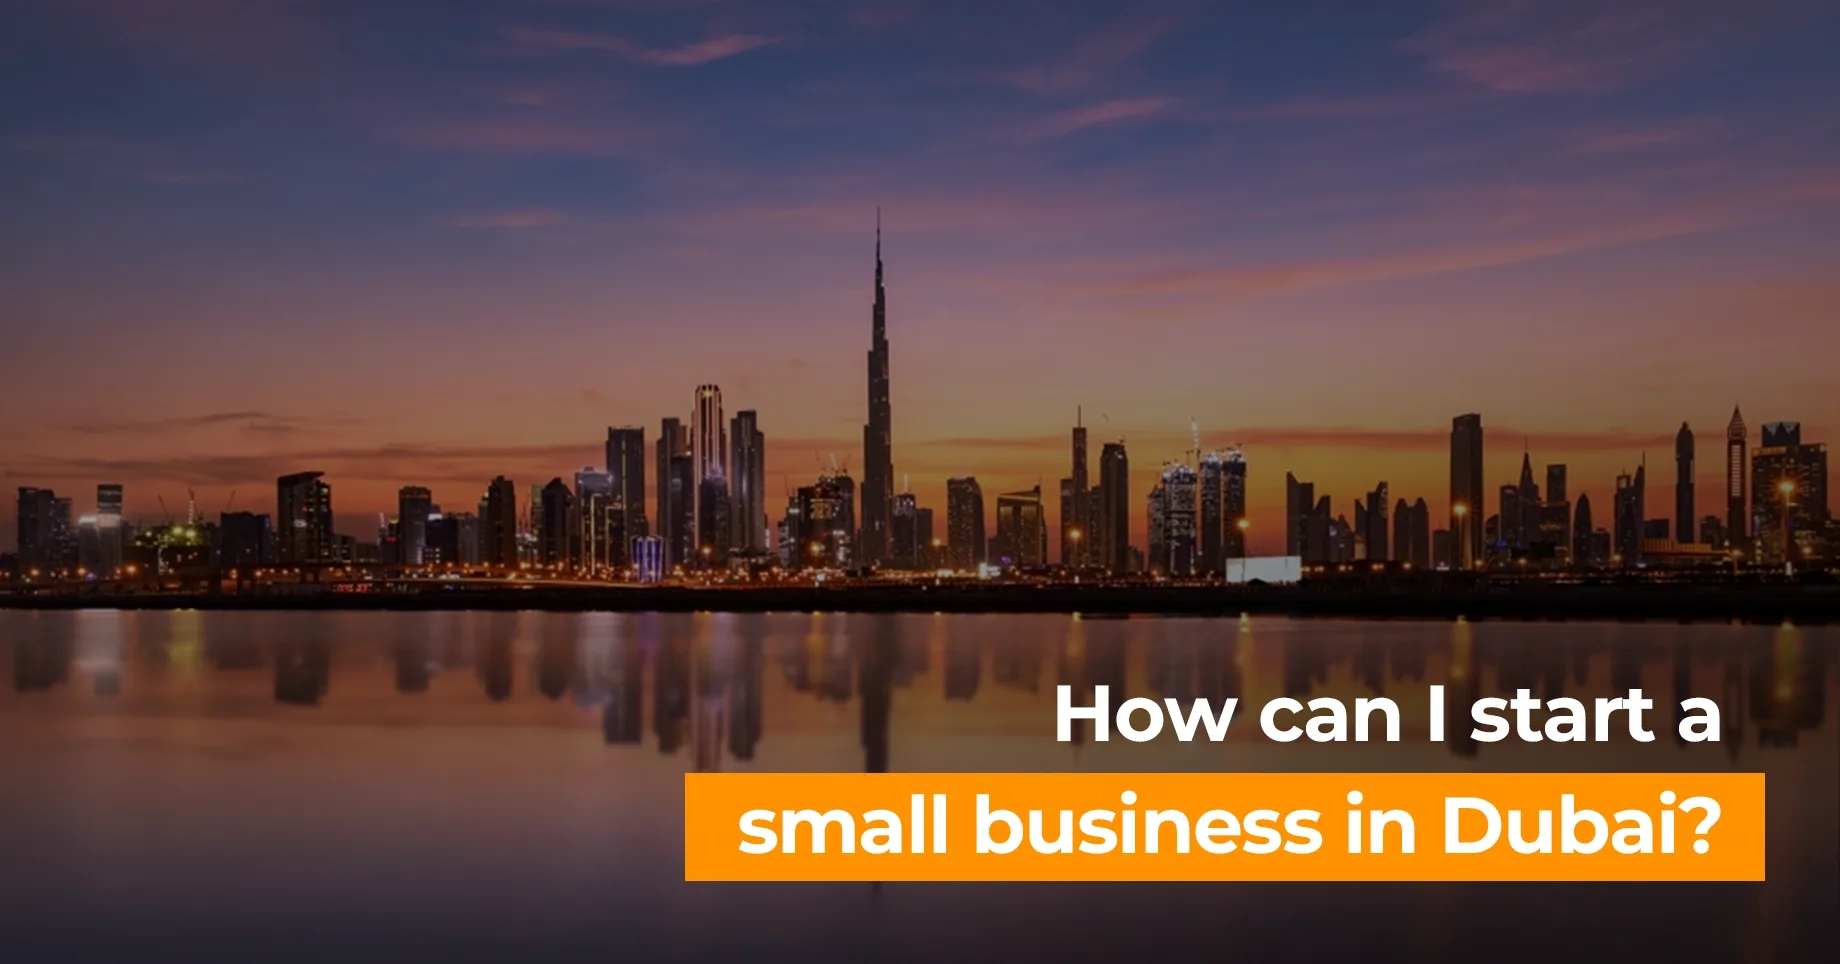 Can you own 100% of a company in Dubai?